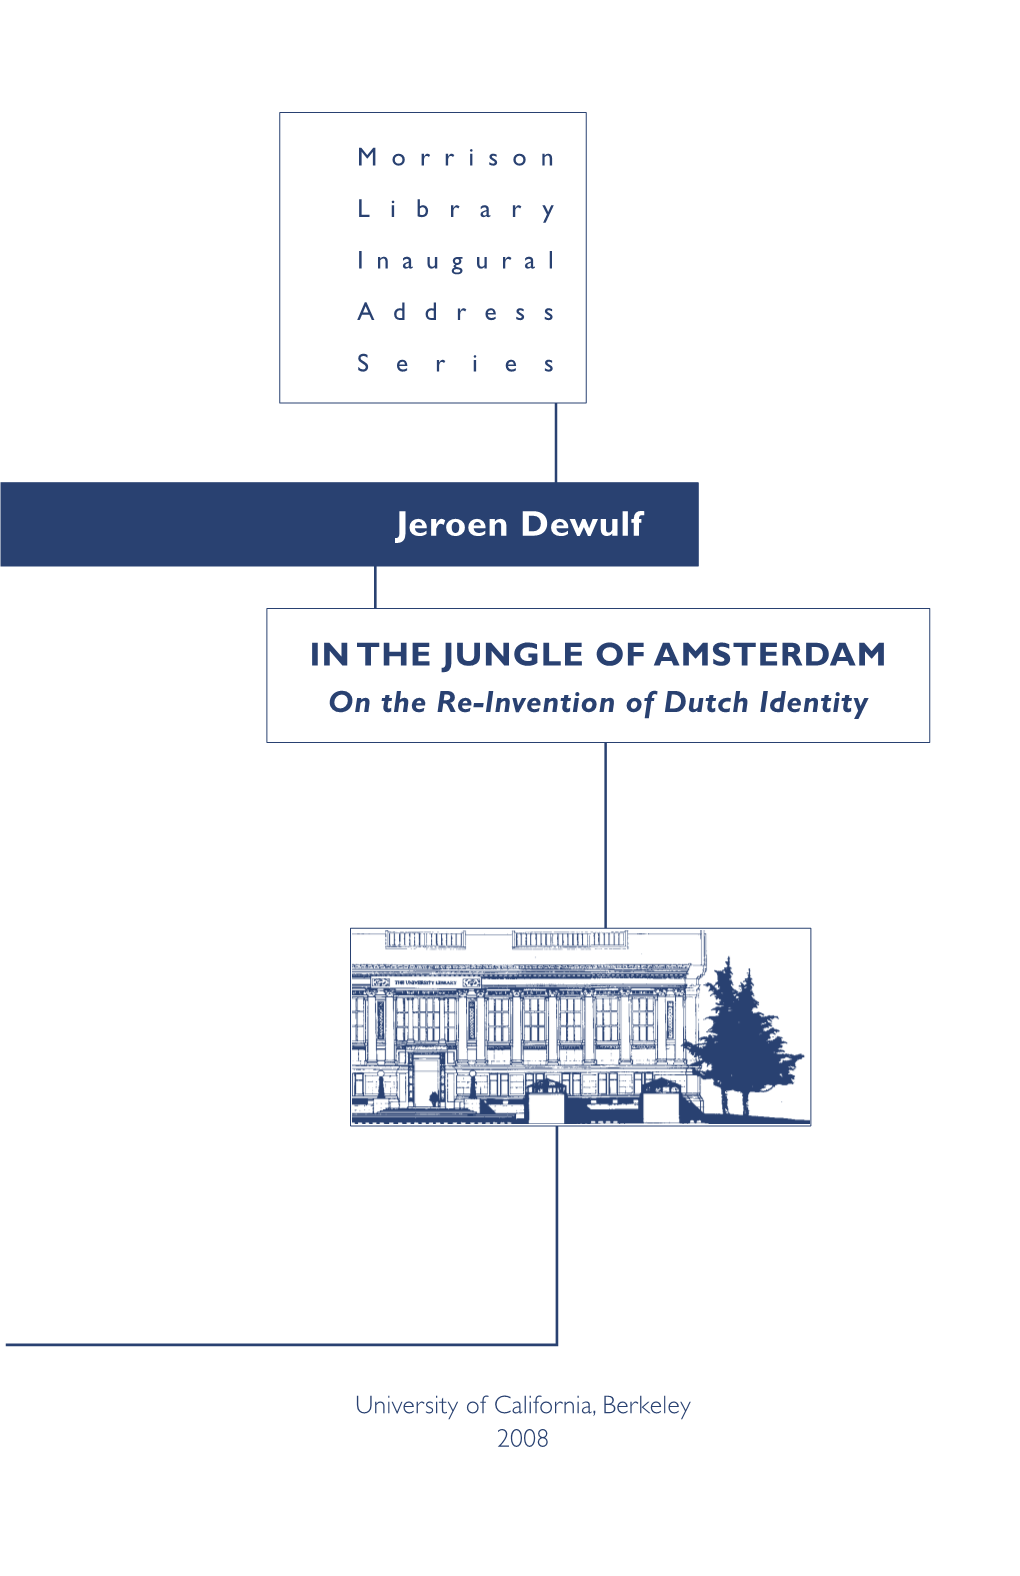 IN the JUNGLE of AMSTERDAM: on the Re-Invention of Dutch Identity